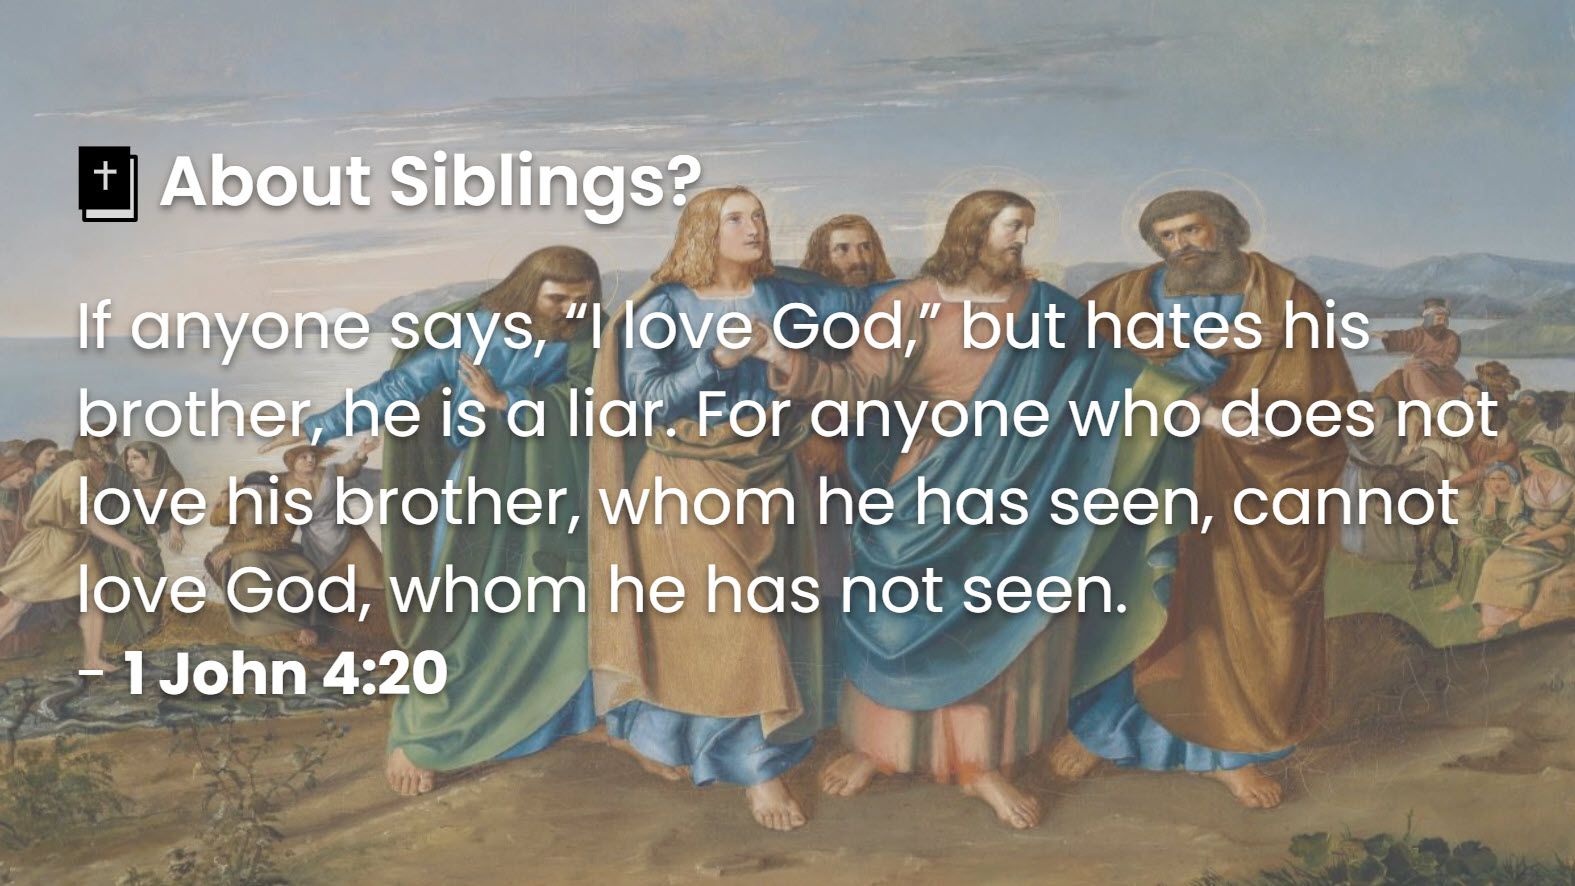 What does the bible say about siblings